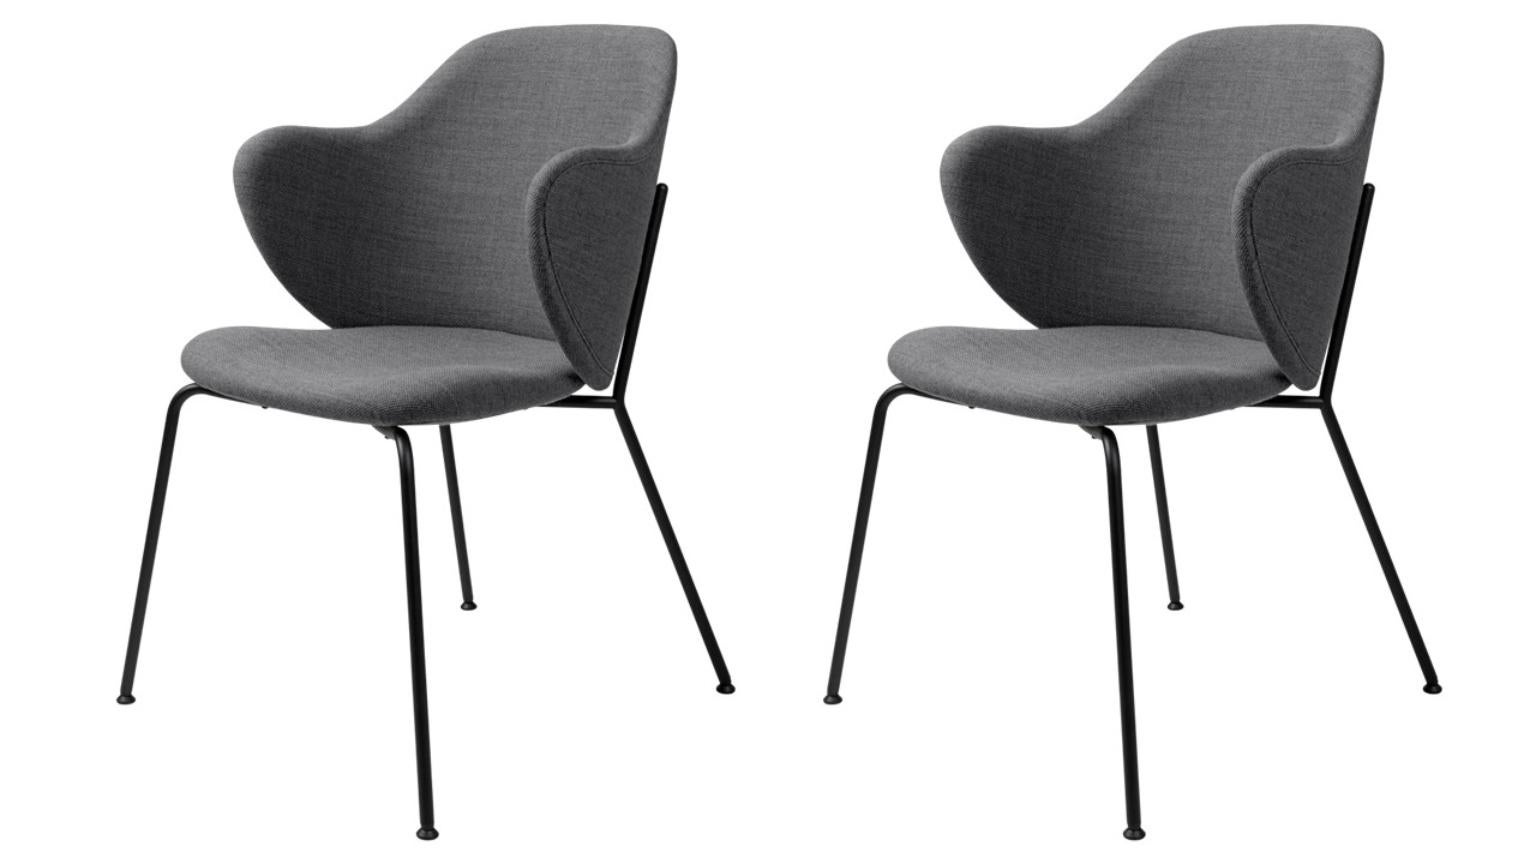 Set of 2 dark grey fiord lassen chairs by Lassen.
Dimensions: W 58 x D 60 x H 88 cm.
Materials: Textile.

The Lassen Chair by Flemming Lassen, Magnus Sangild and Marianne Viktor was launched in 2018 as an ode to Flemming Lassen’s uncompromising